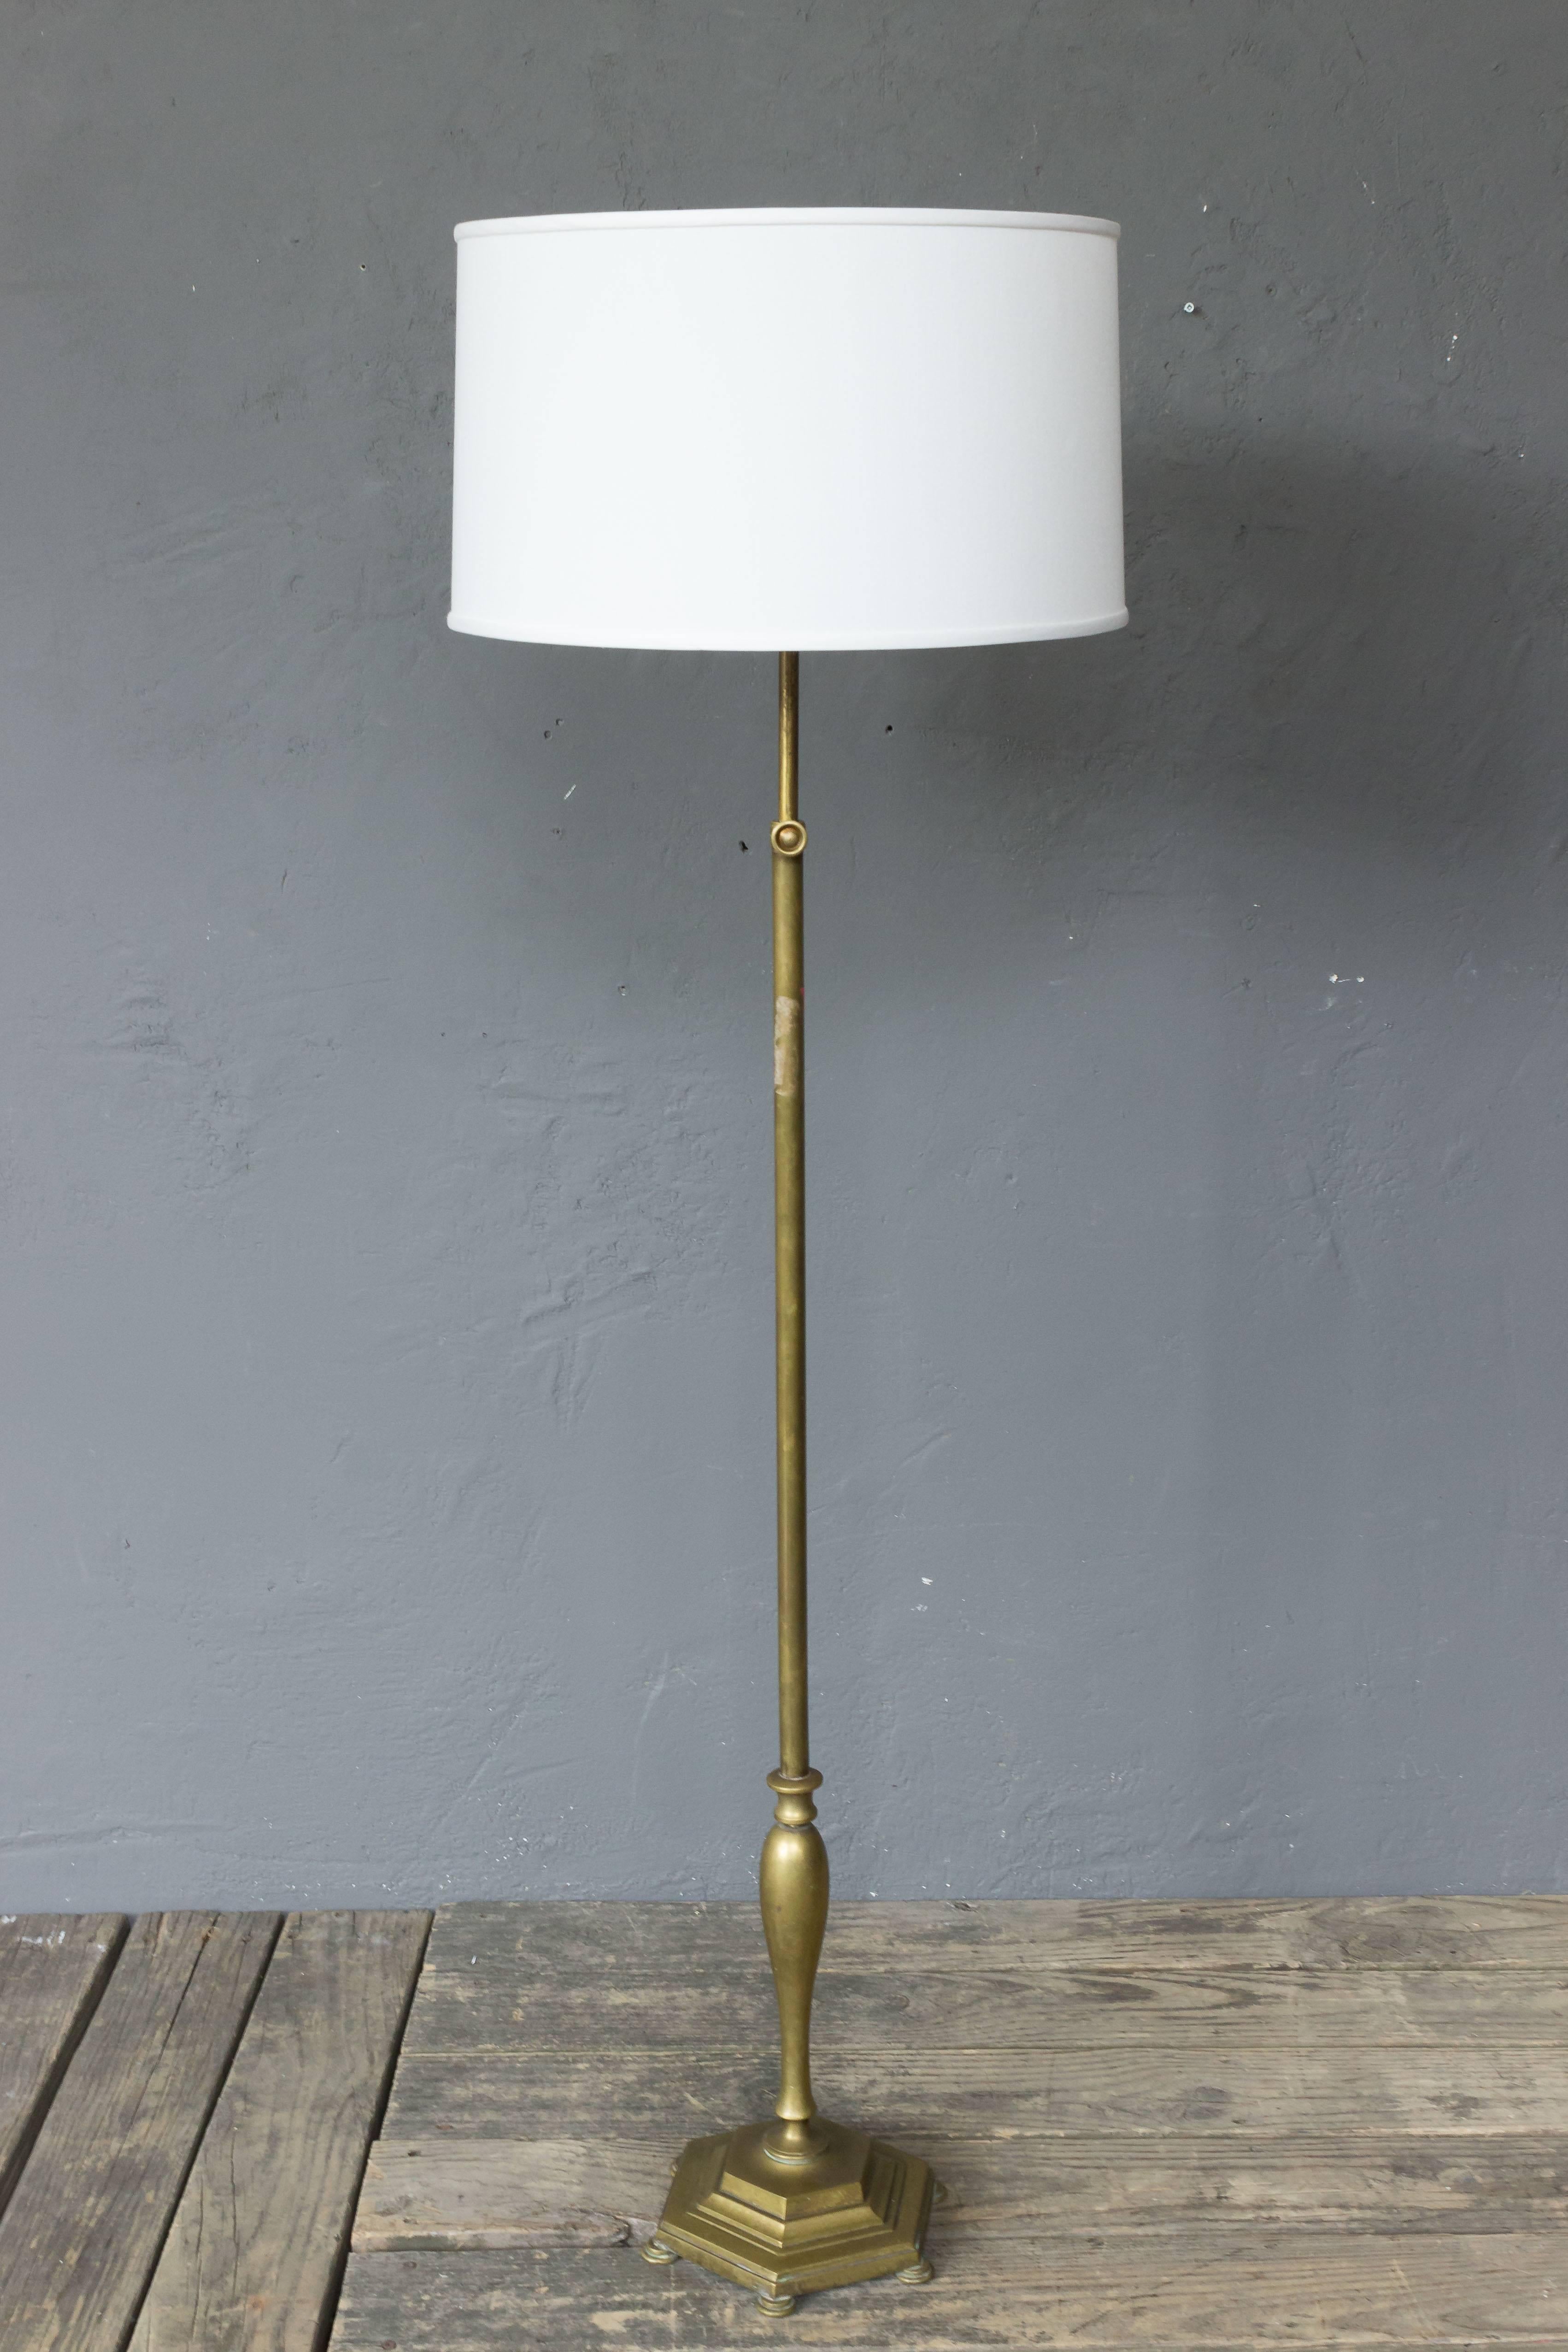 1940s French brass floor lamp on hexagonal base. Listed as a single lamp but a pair is available.

Price includes polishing or plating and new wiring. Please allow 2 to 3 weeks for completion. Not sold with shade (photographed with 10 inch H x 18